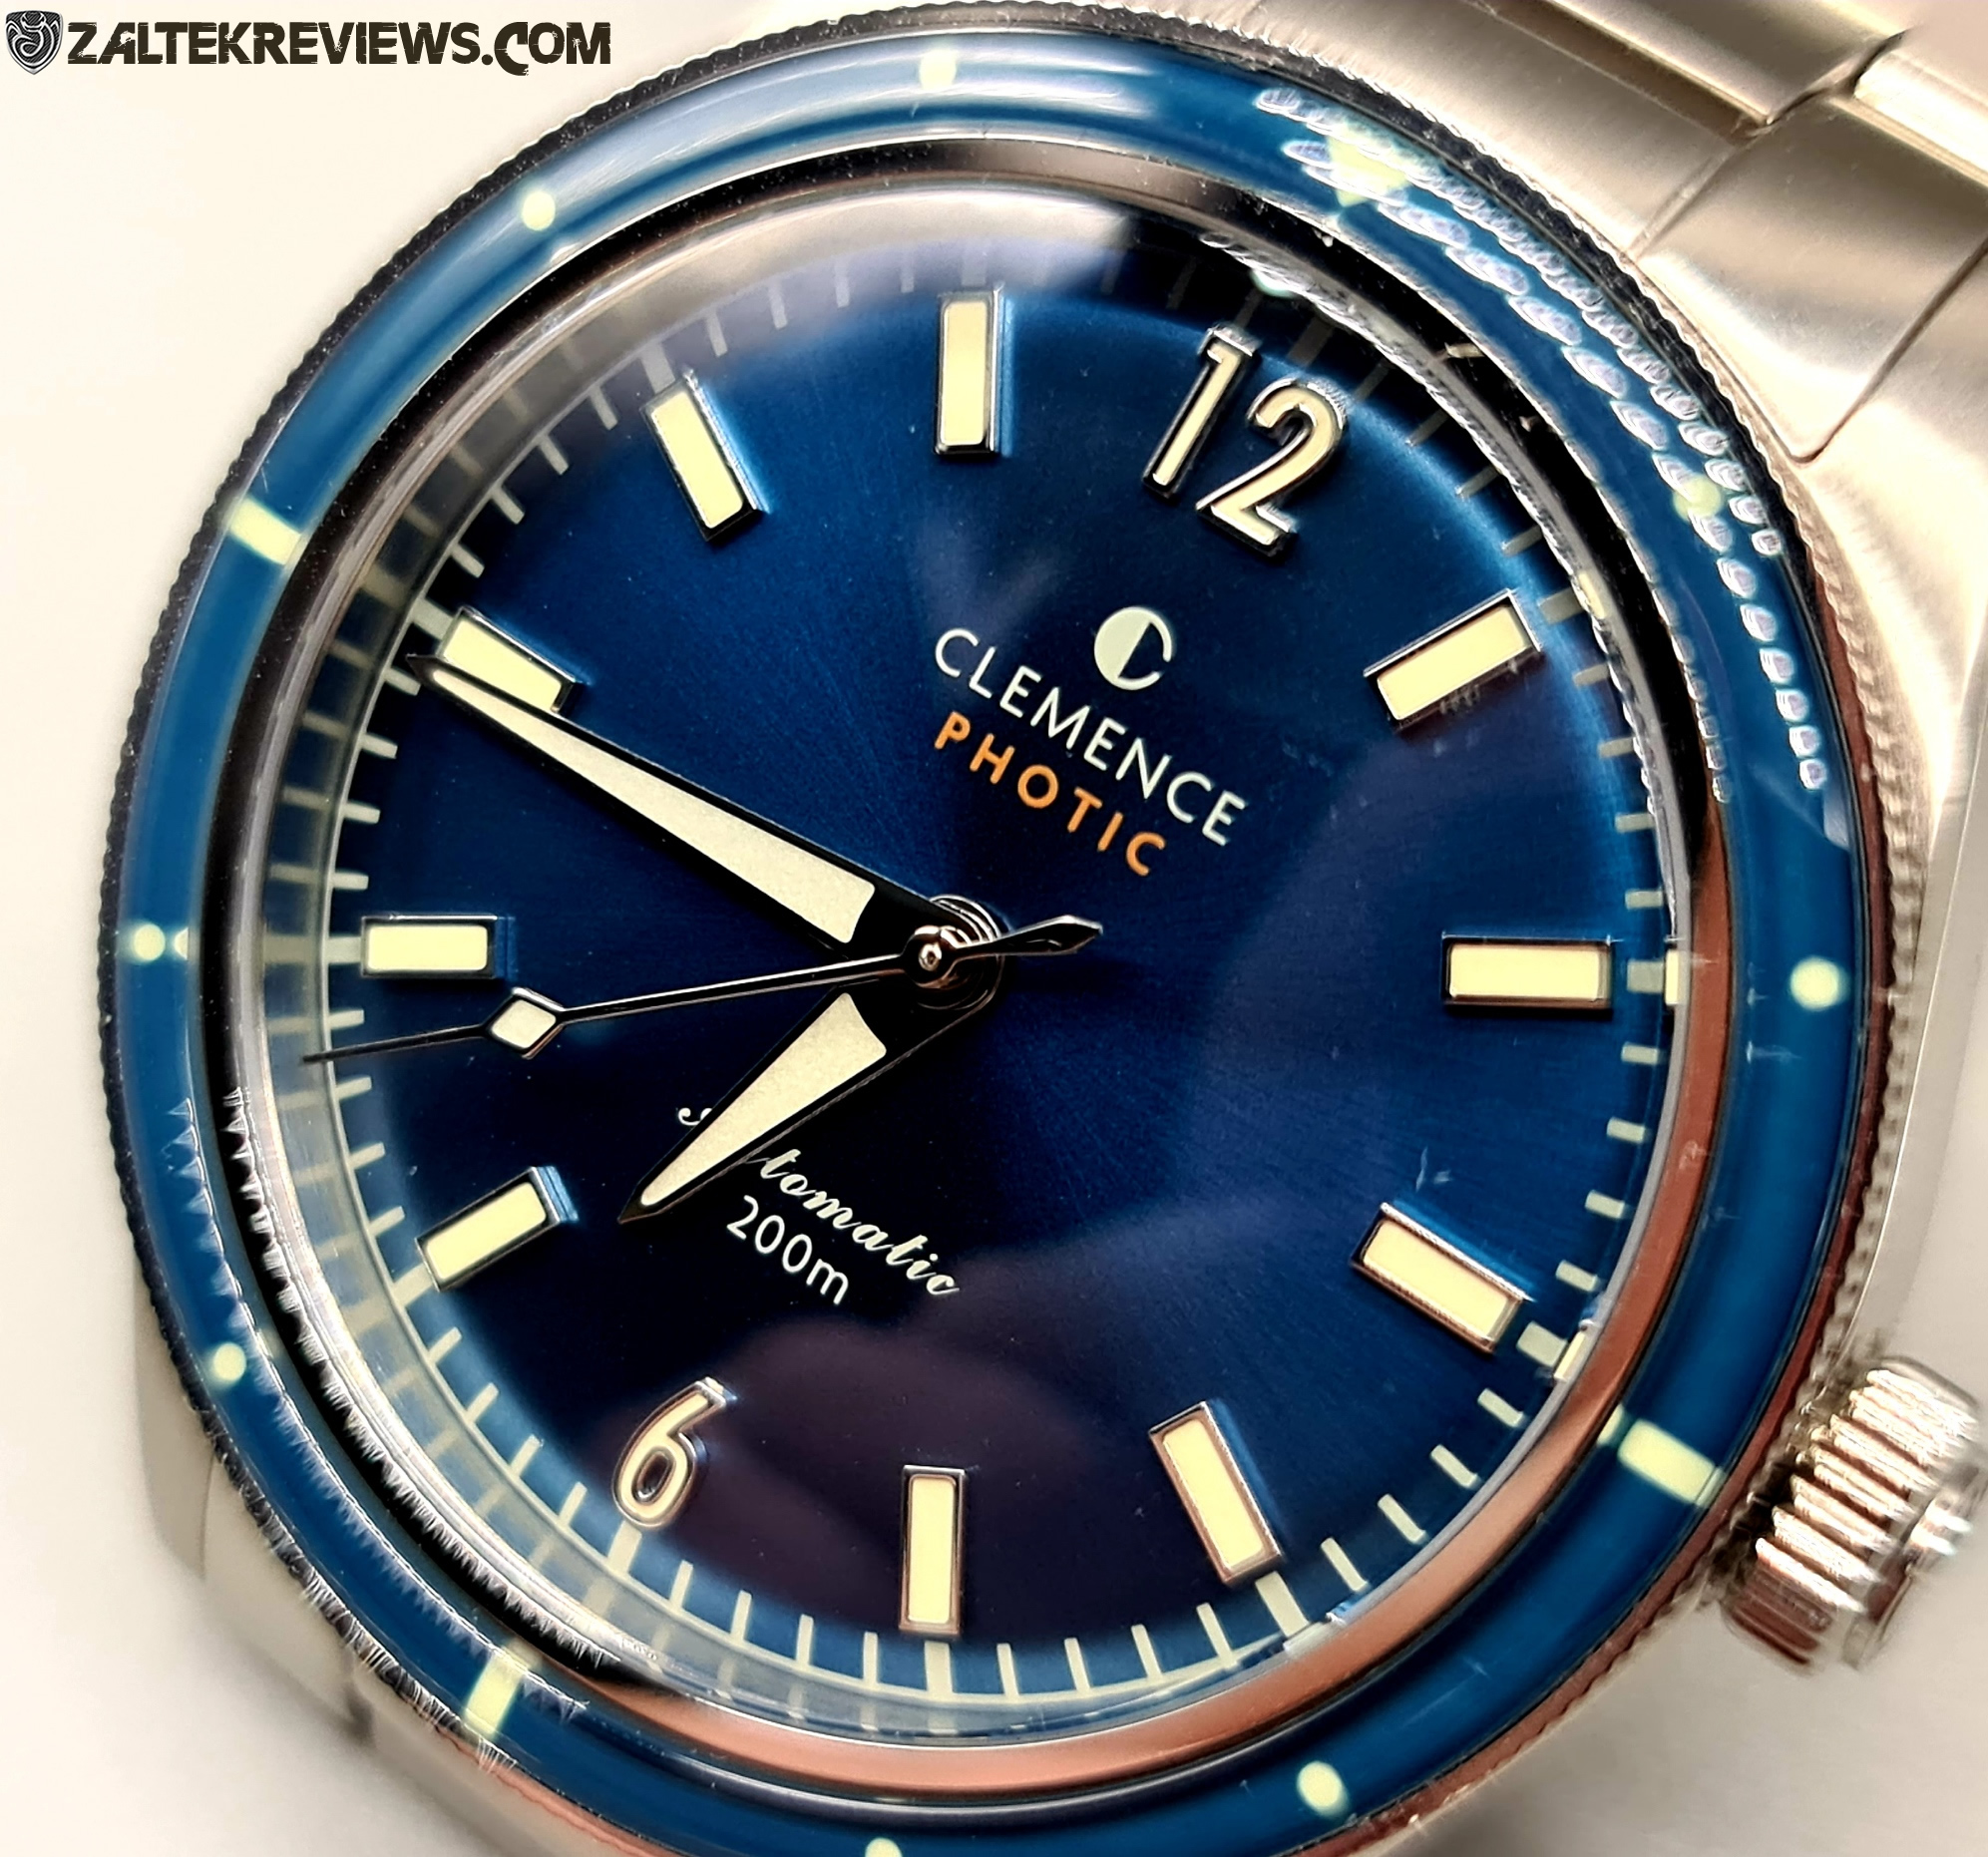 Clemence Photic Diver Review